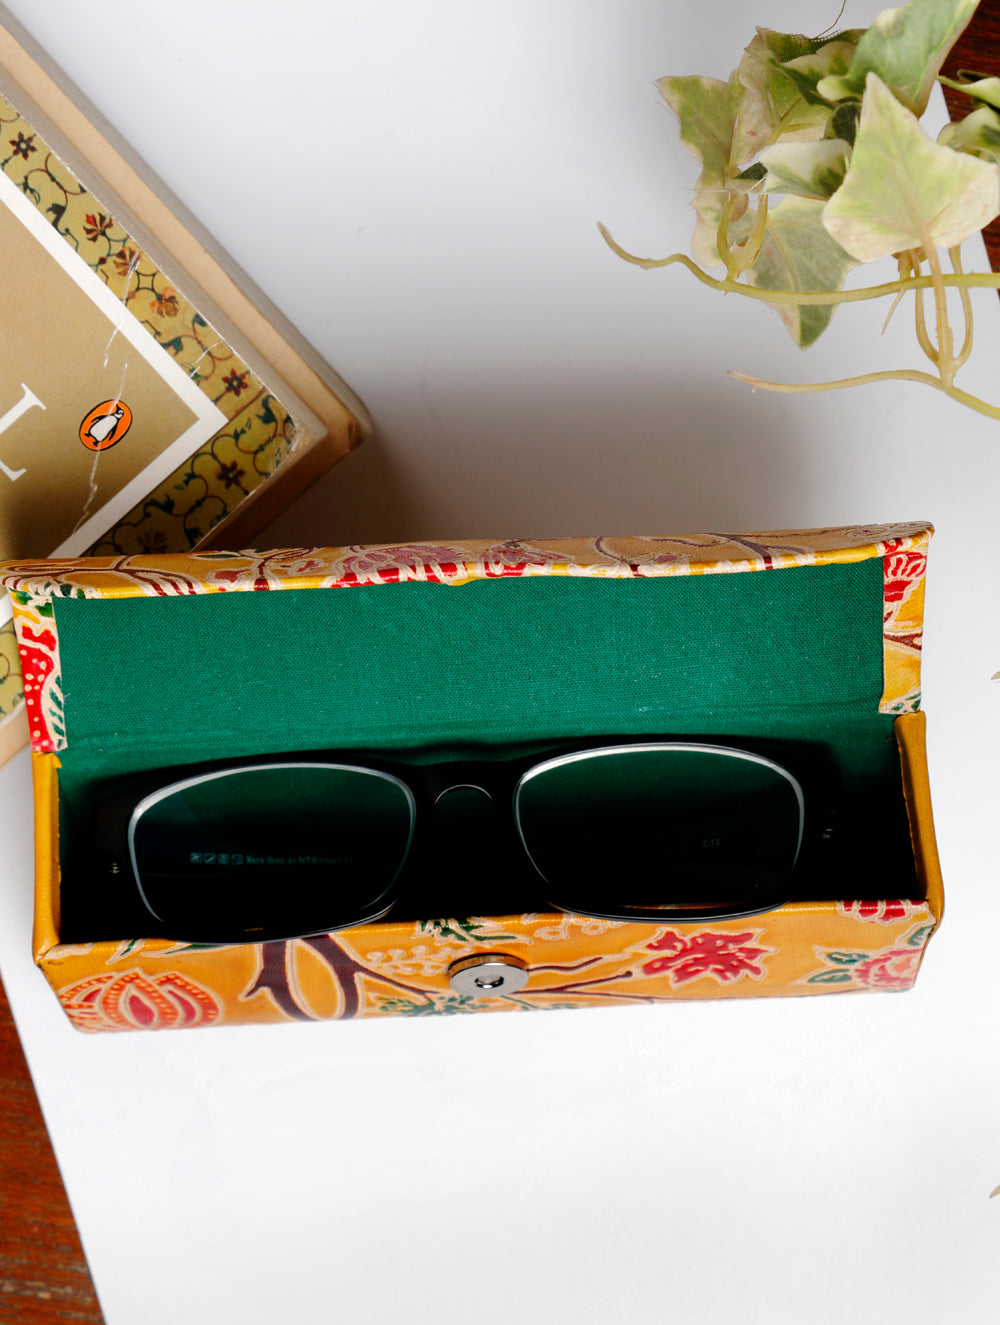 Load image into Gallery viewer, Embossed Leather - Spectacle Case - The India Craft House 